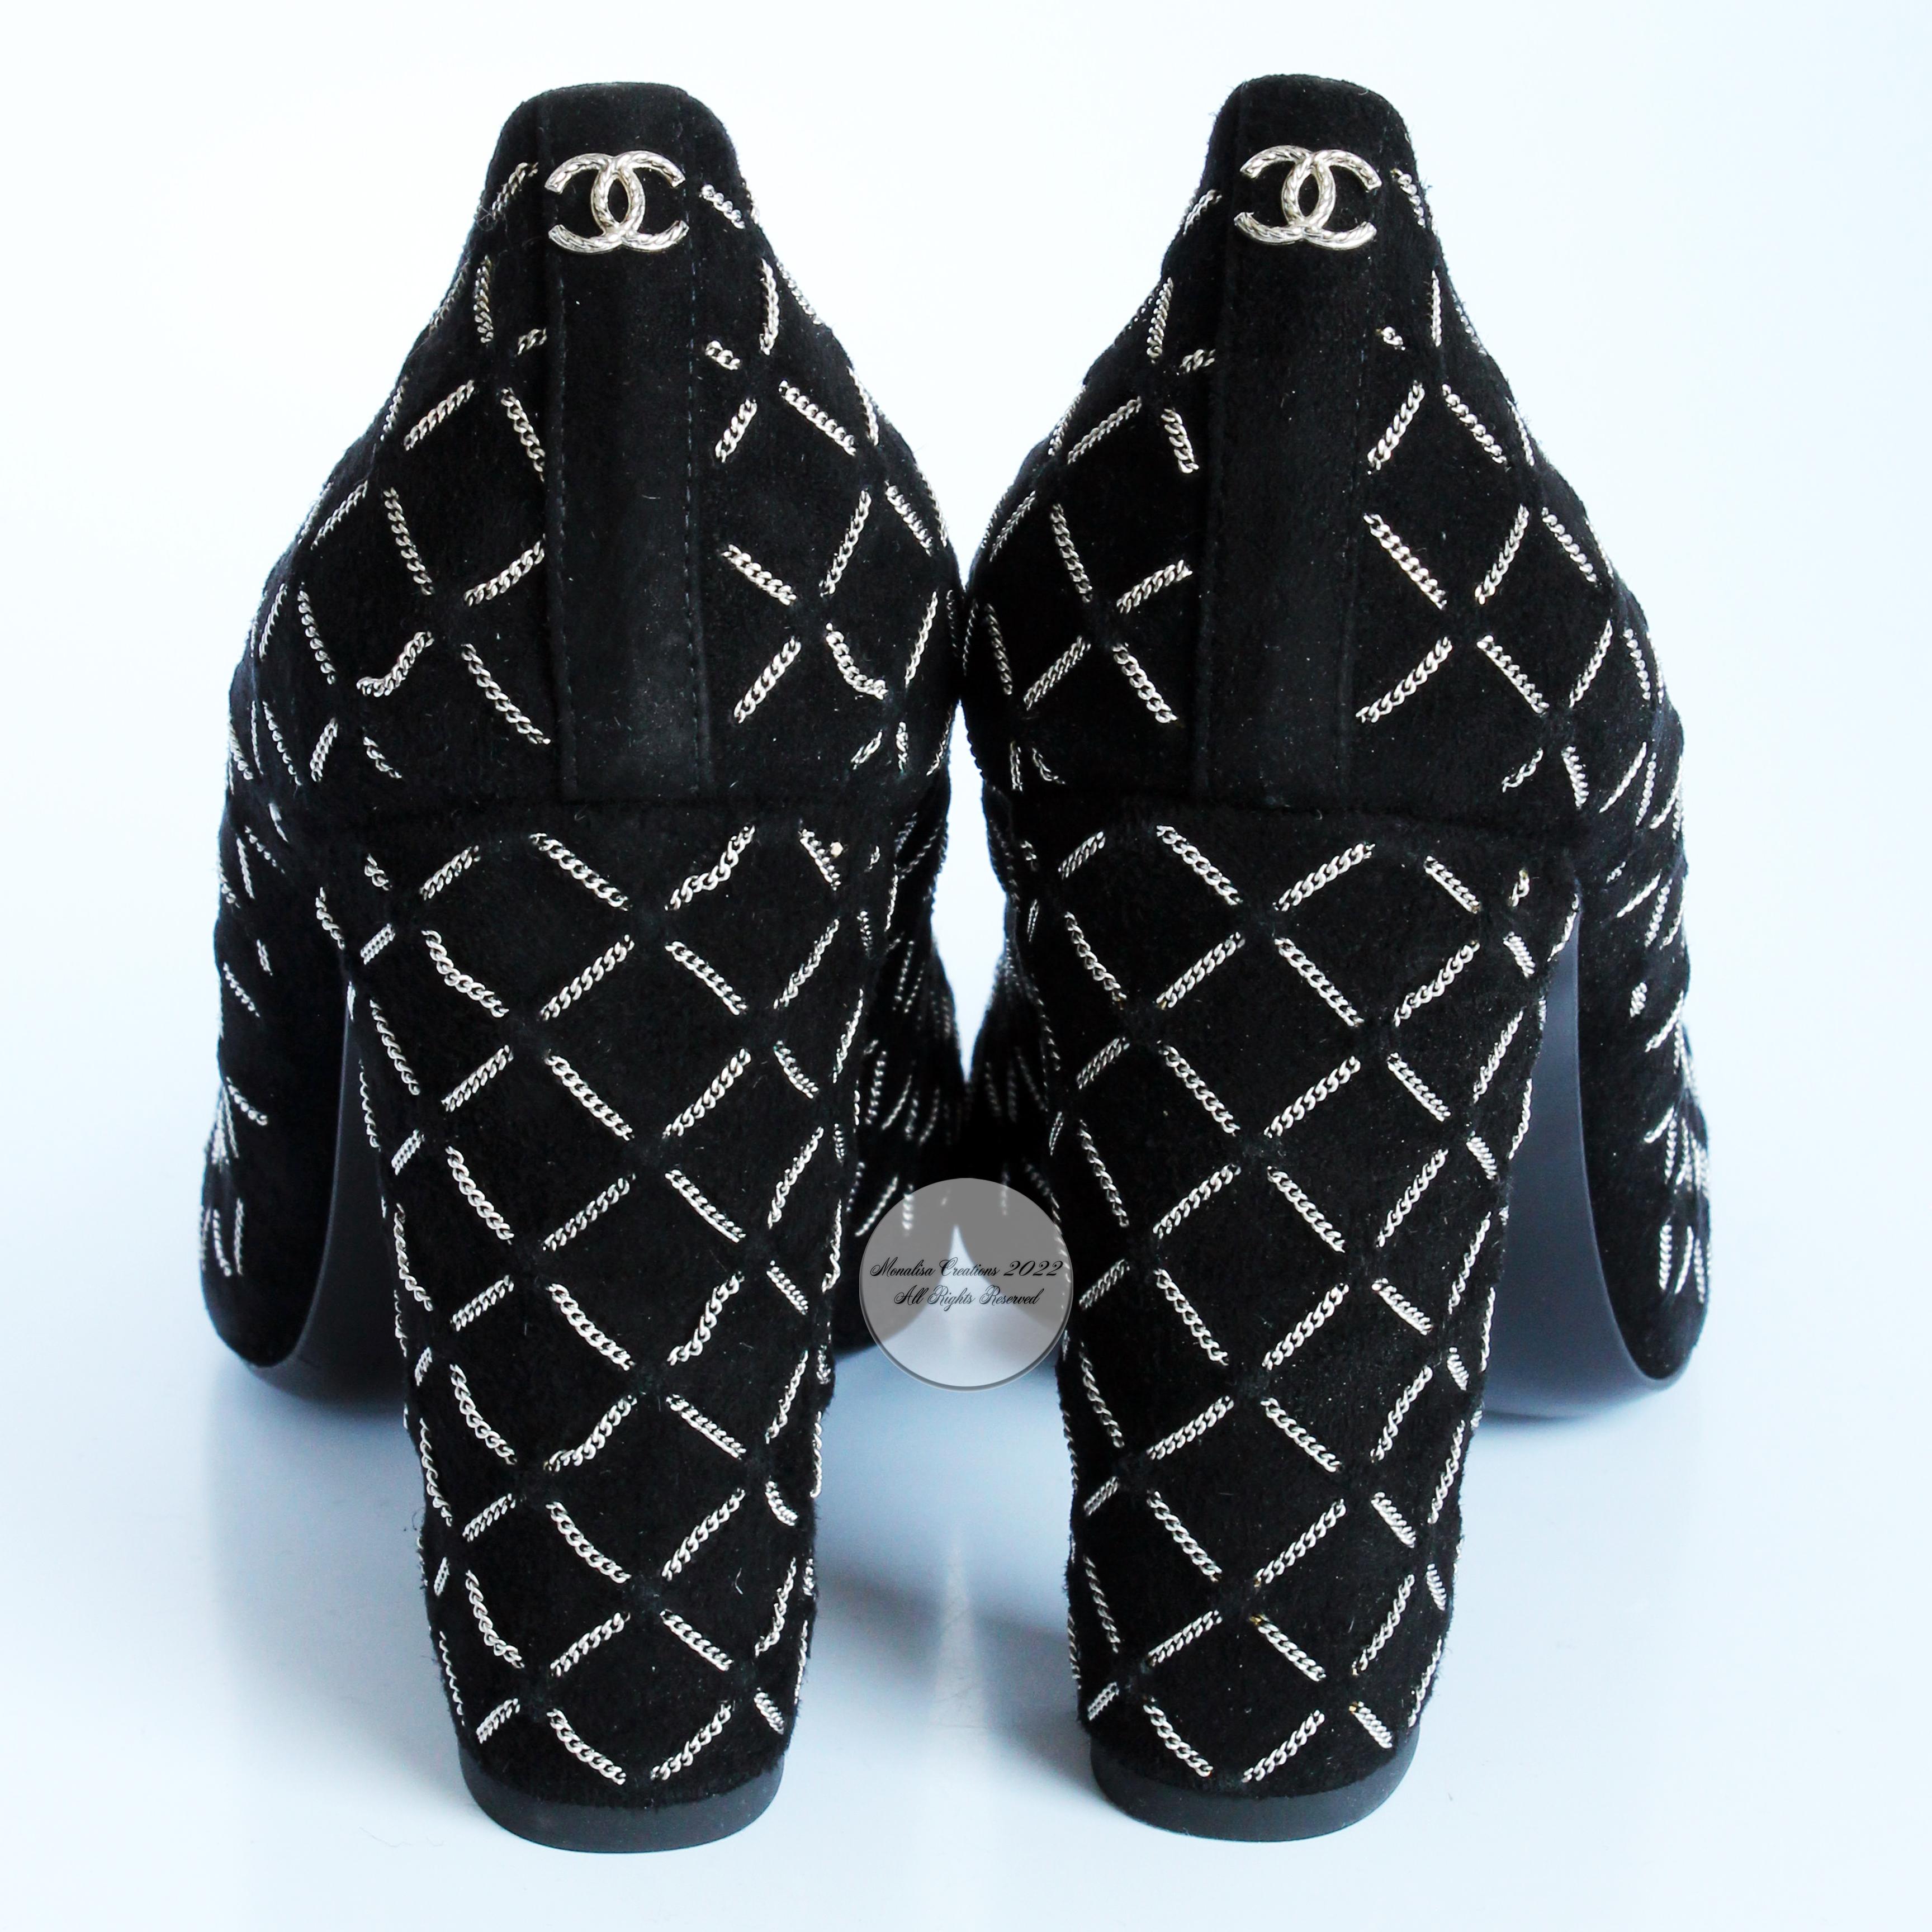 Chanel Black Kid Suede Pumps with Mini Chain CC Logo 15A Size 38.5 New + Box 2